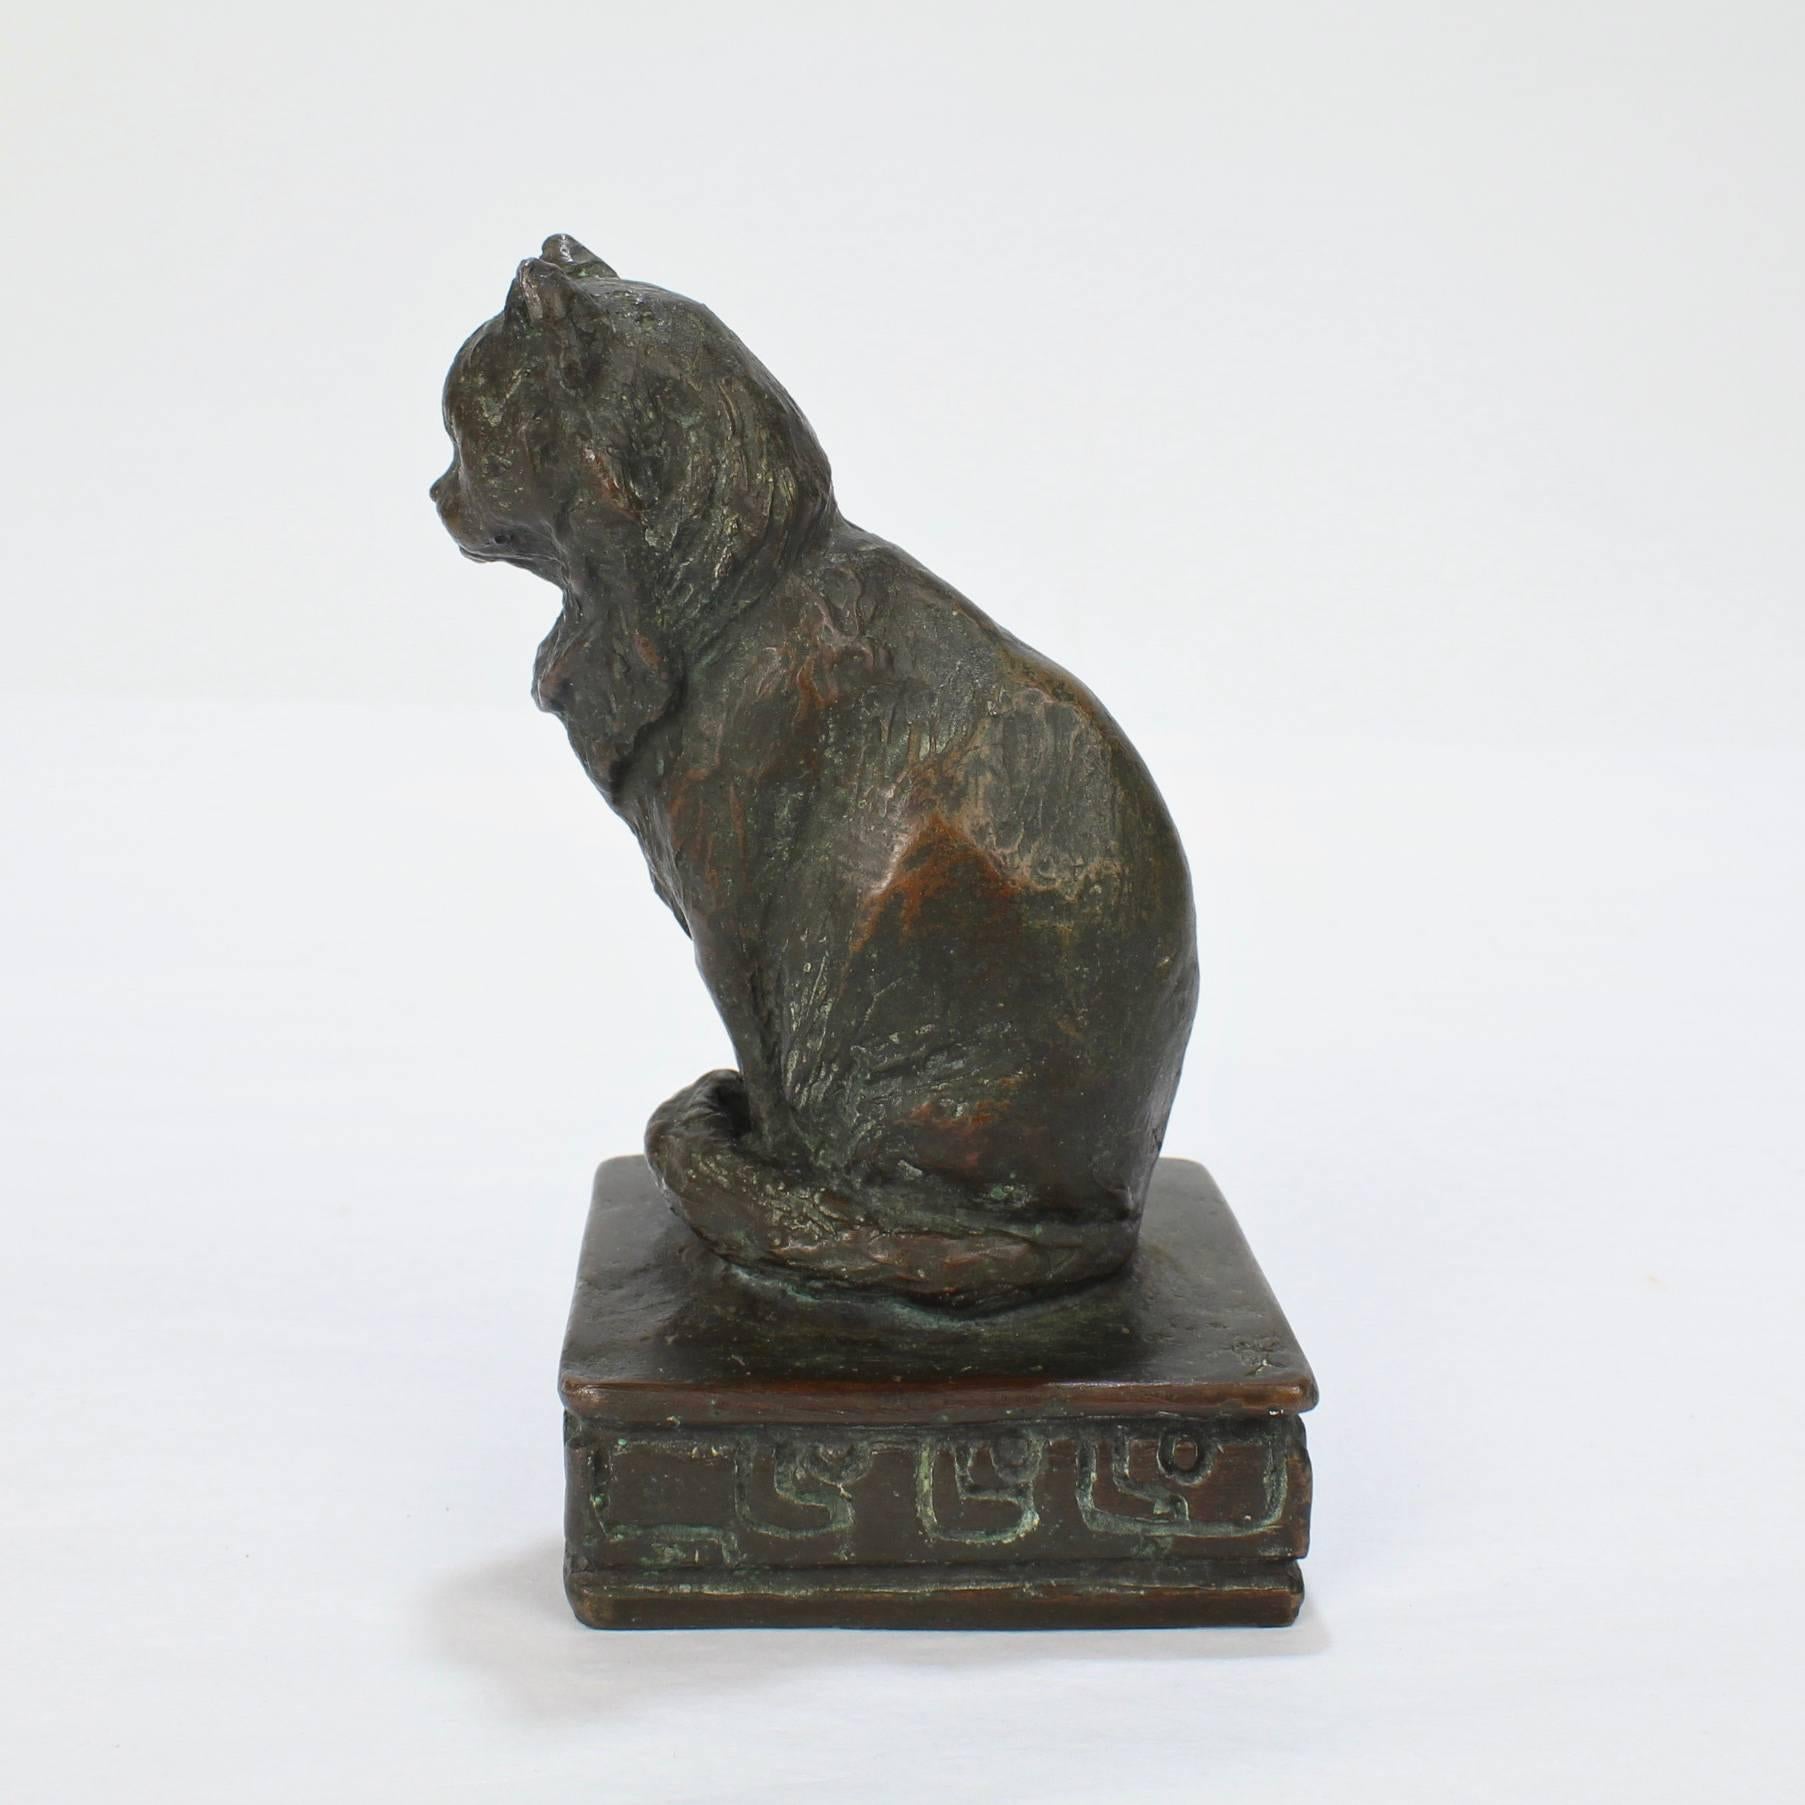 A fine, desk top size bronze sculpture of a Persian cat by Ruth Walker Brooks.

Brooks was a student Anna Vaughn Hyatt in New York.

The bronze has a warm patina with spots of green oxidation.

Measures: Height: circa 4 3/4 in.

Items purchased from